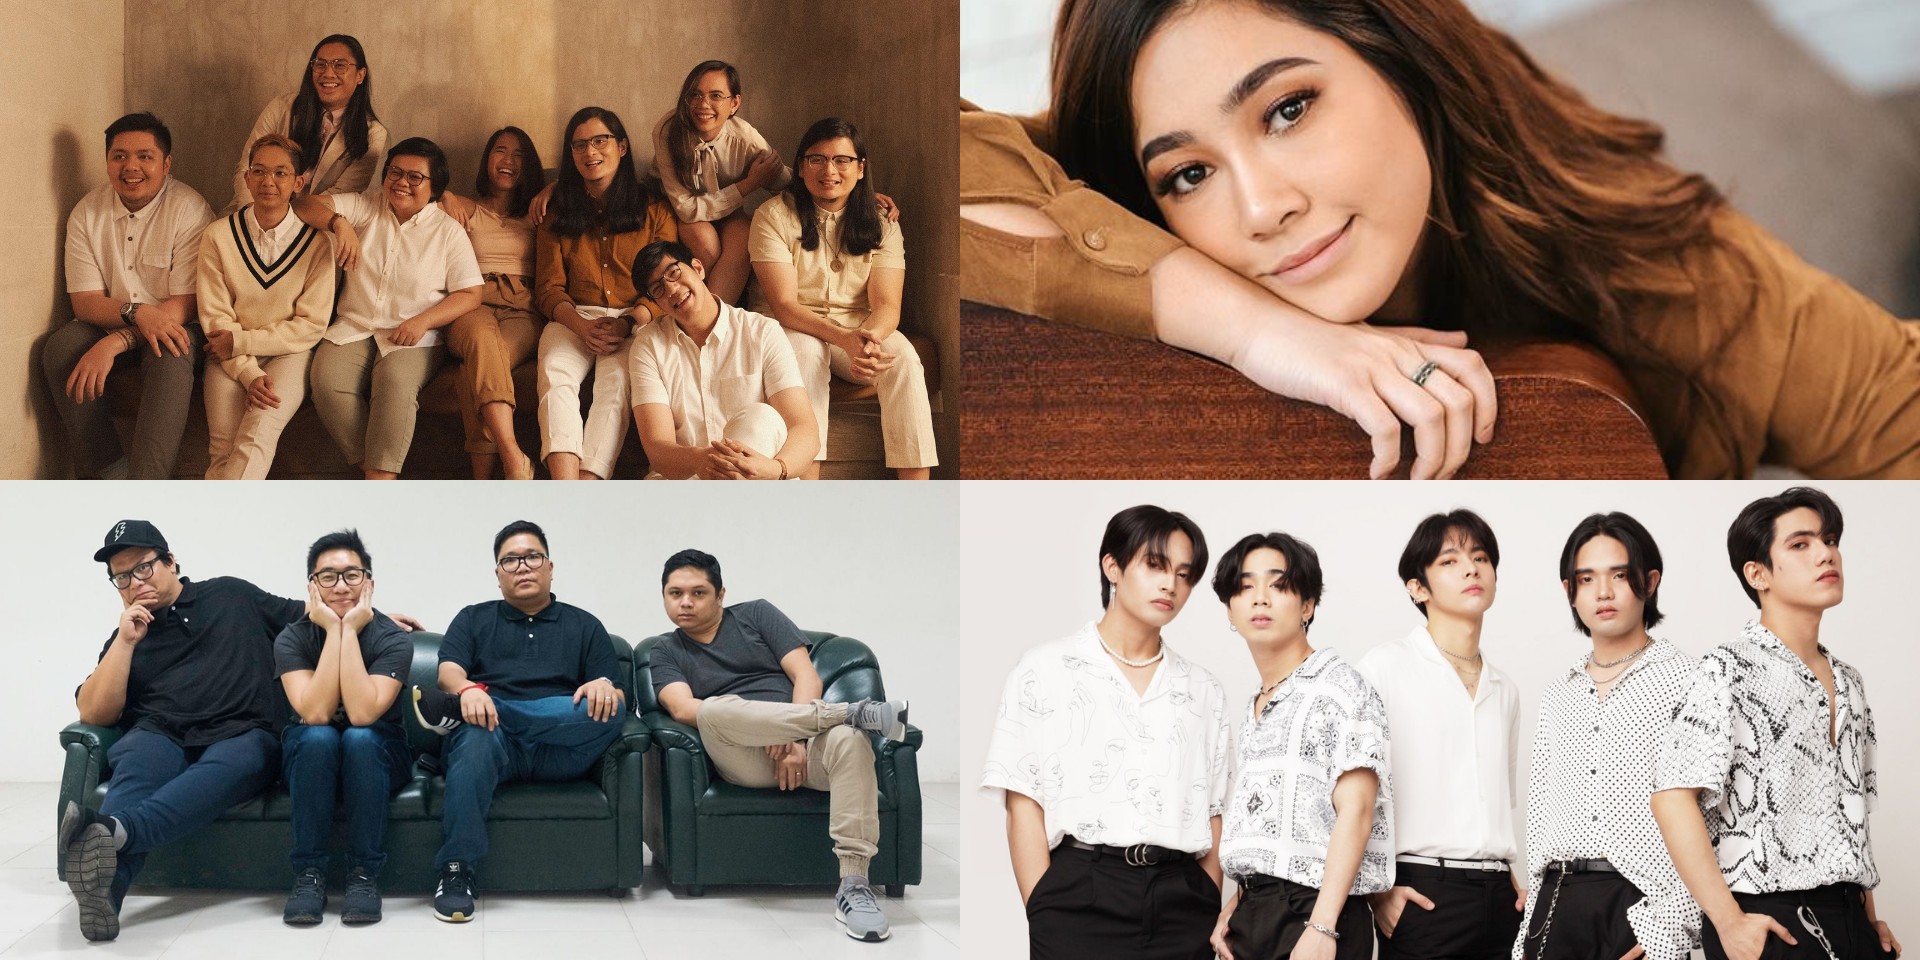 Join Ben&Ben, Moira Dela Torre, SB19, The Itchyworms, and more at 'BYE2020' virtual concert